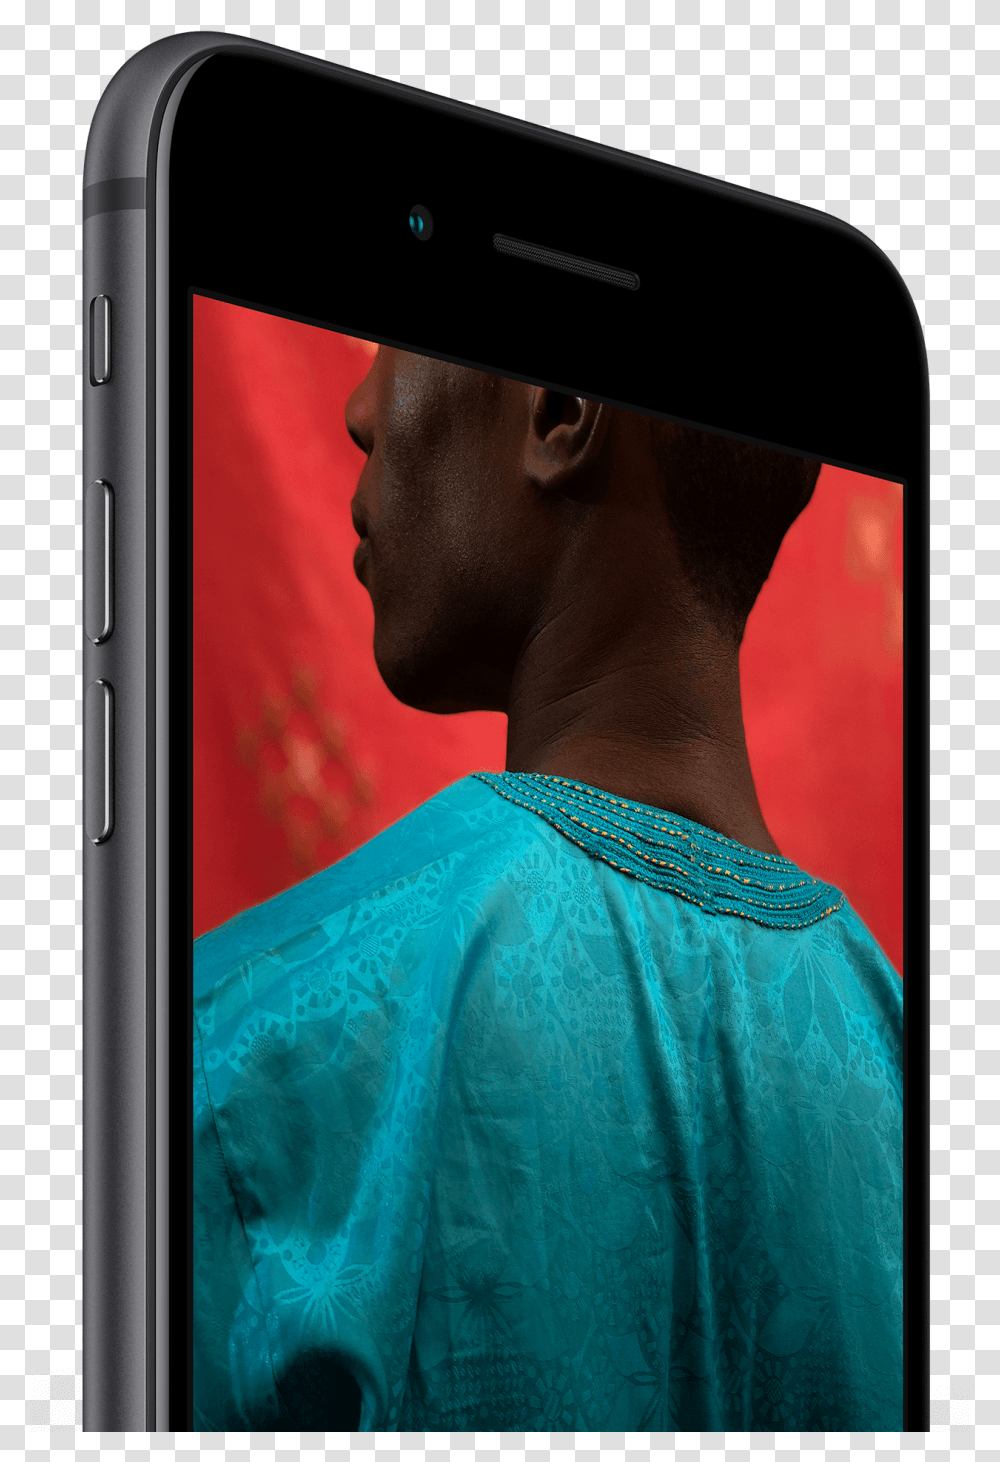 Apple Iphone 8 The Good Guys Apple Iphone 8 Plus, Electronics, Mobile Phone, Cell Phone, Person Transparent Png